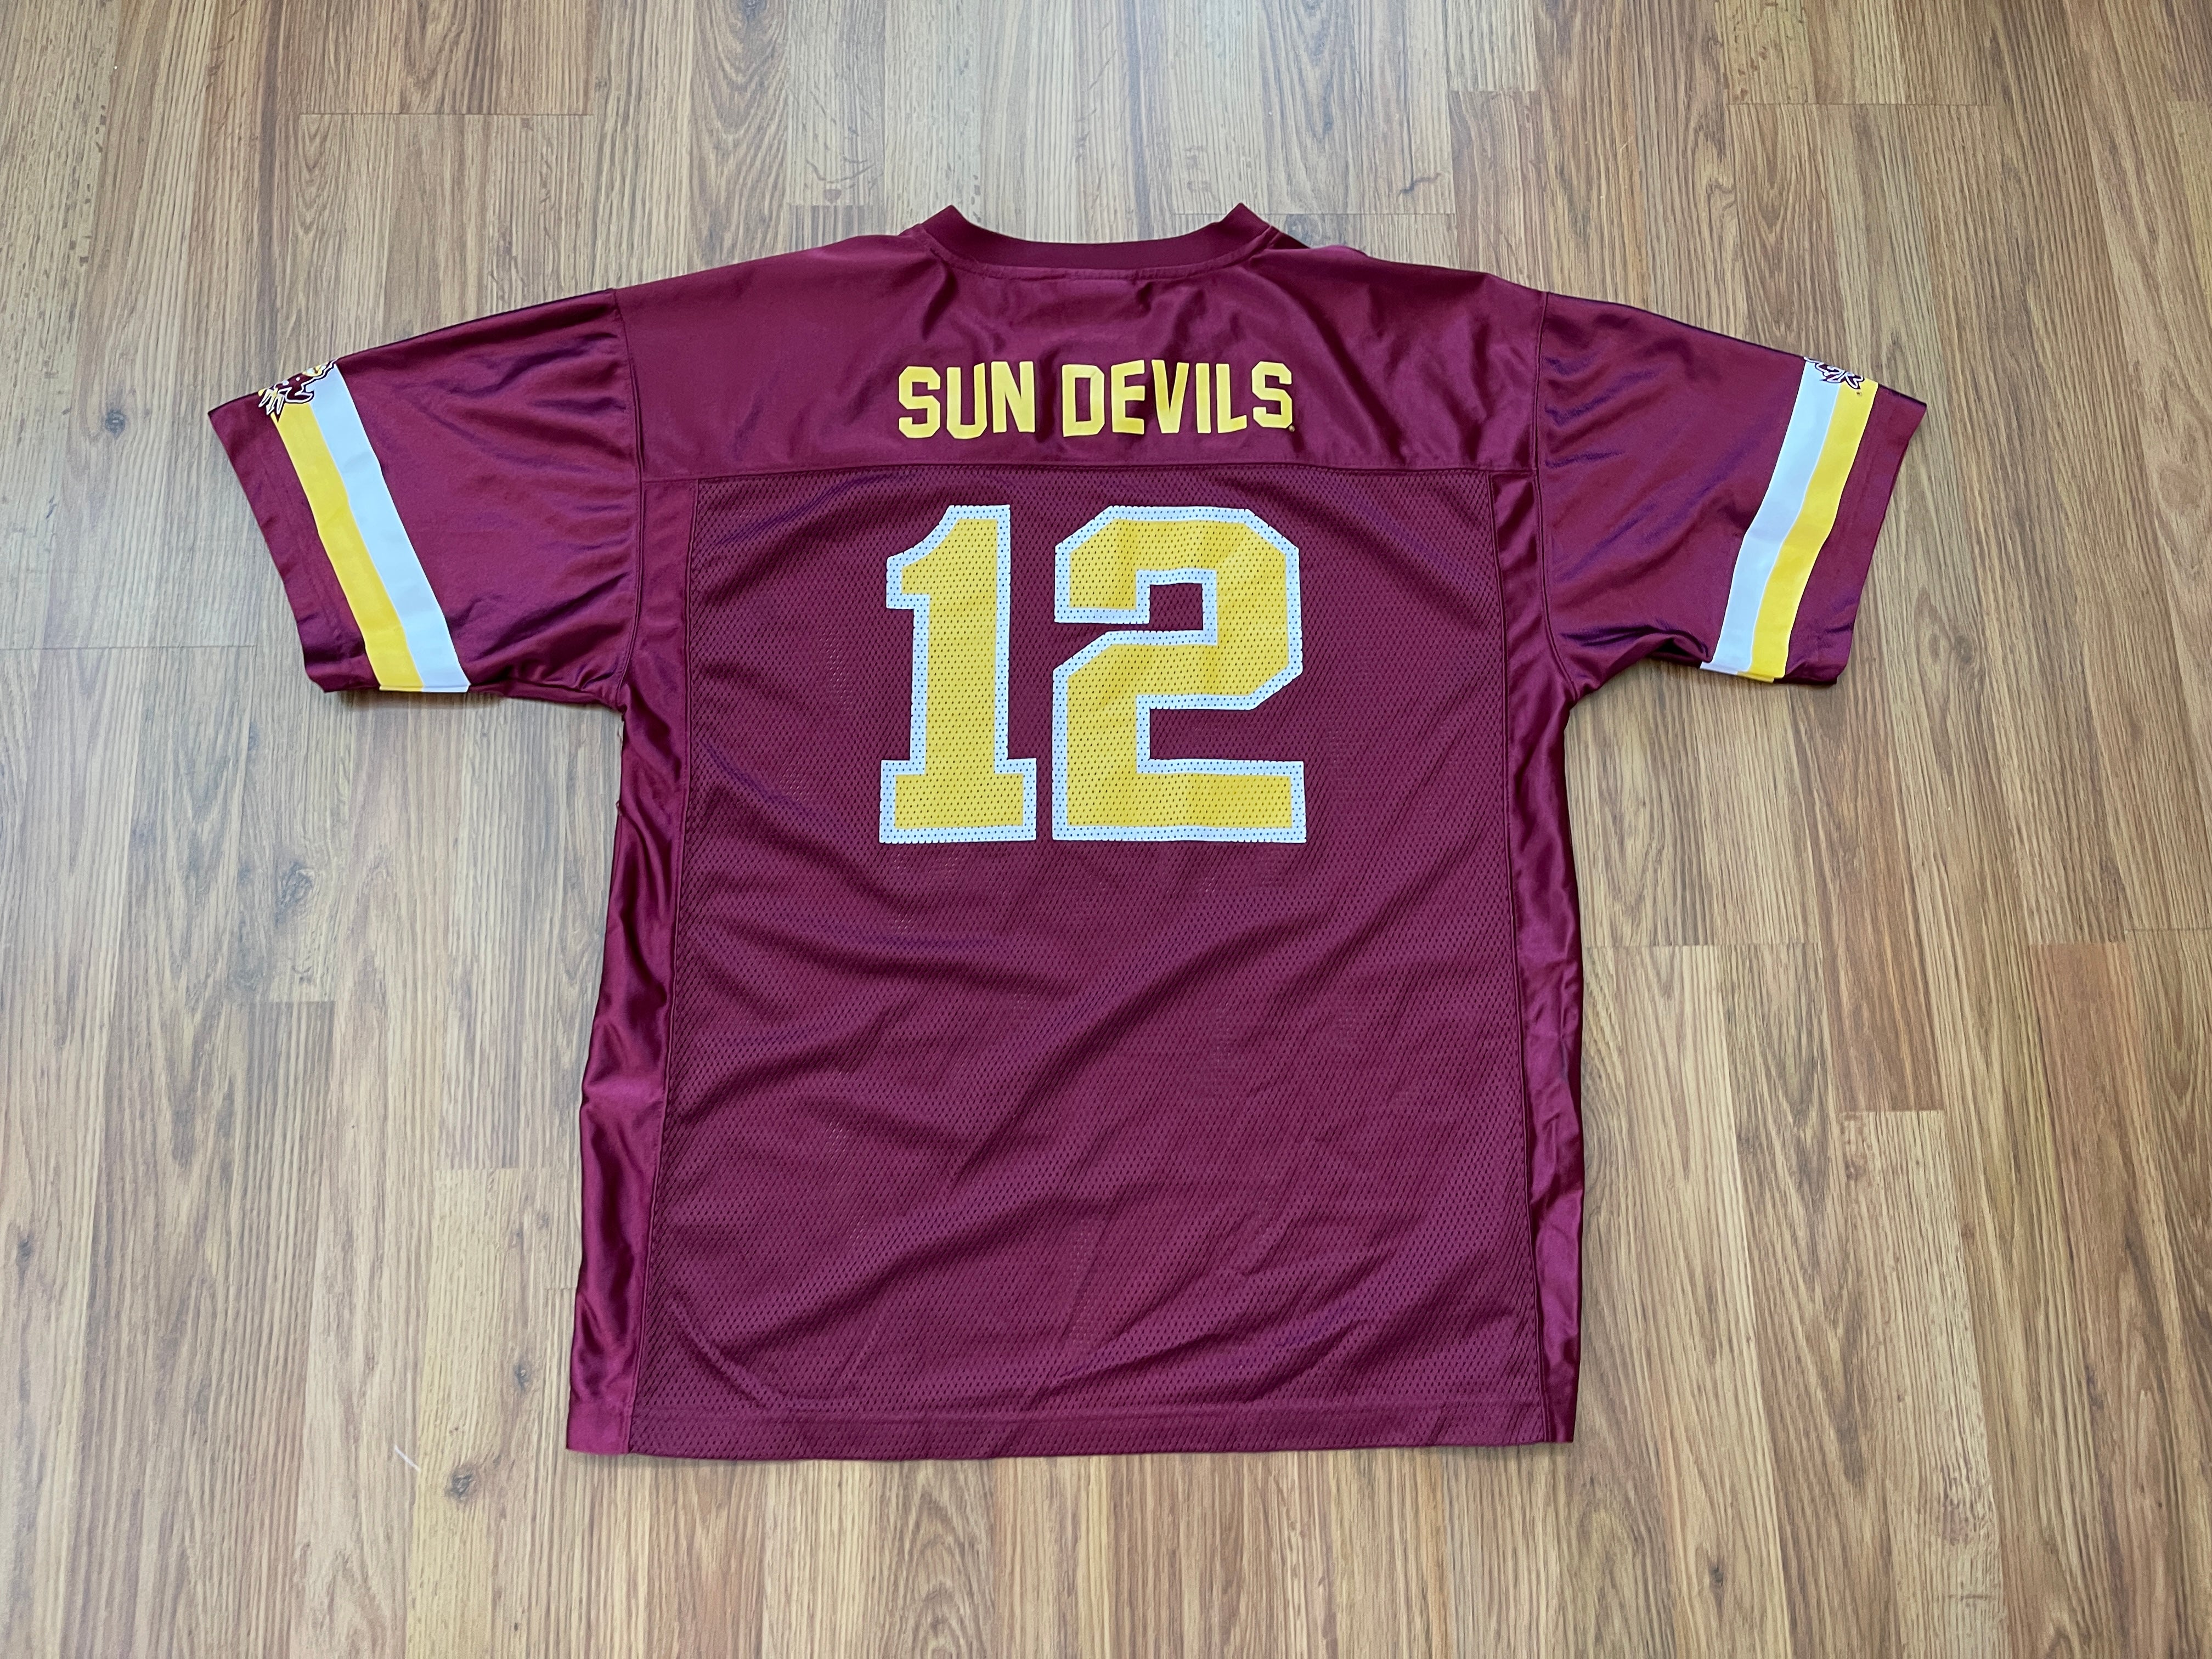 Sports / College Vintage Jersey Suns 7 Size XL Made in USA